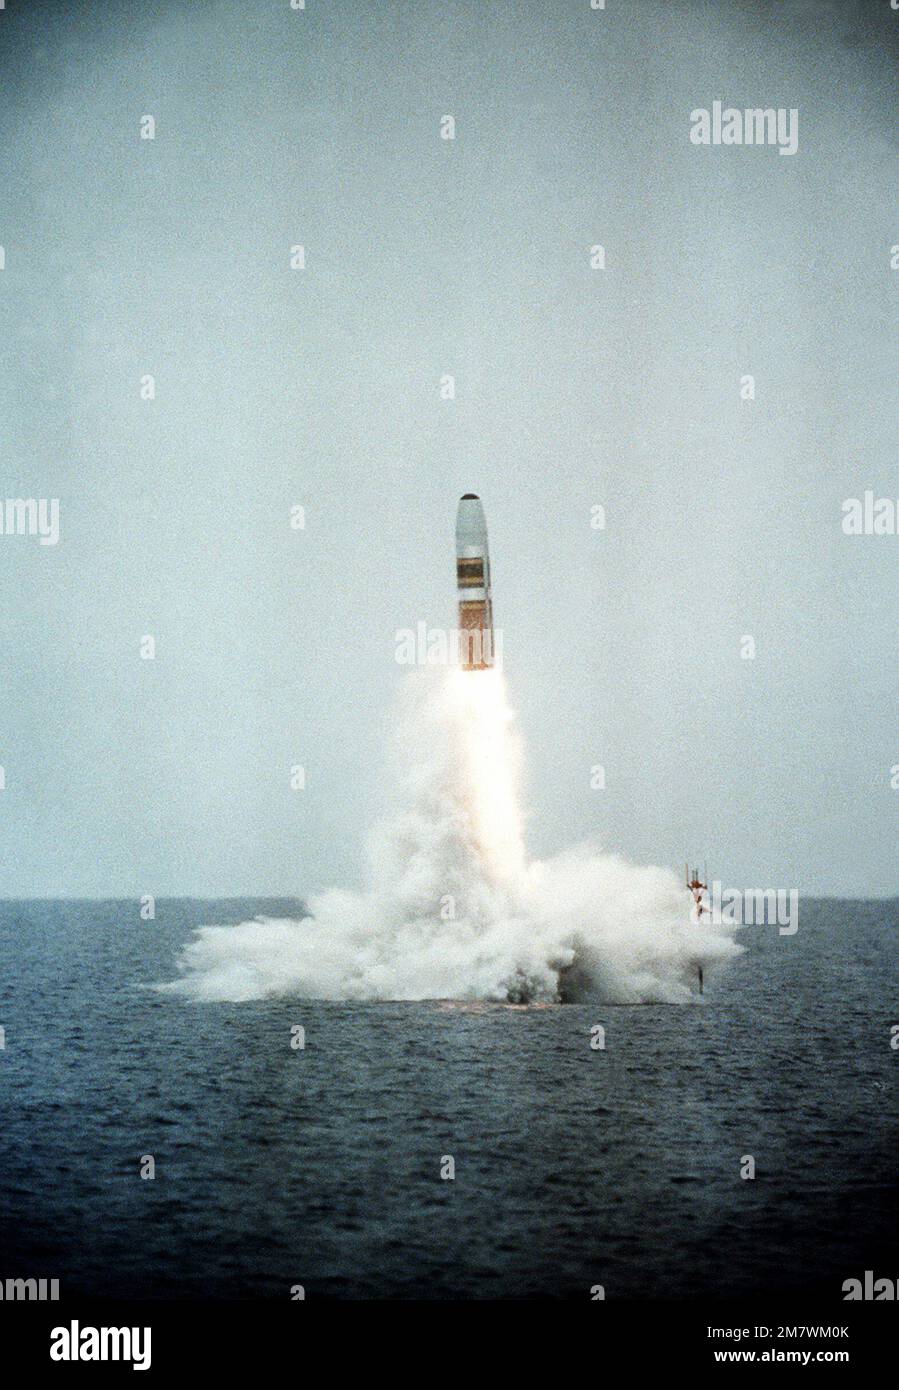 A view of the 13th demonstration and shakedown operation launch of a Trident I missile from the nuclear-powered strategic missile submarine USS JAMES MADISON (SSBN-627). Country: Unknown Stock Photo